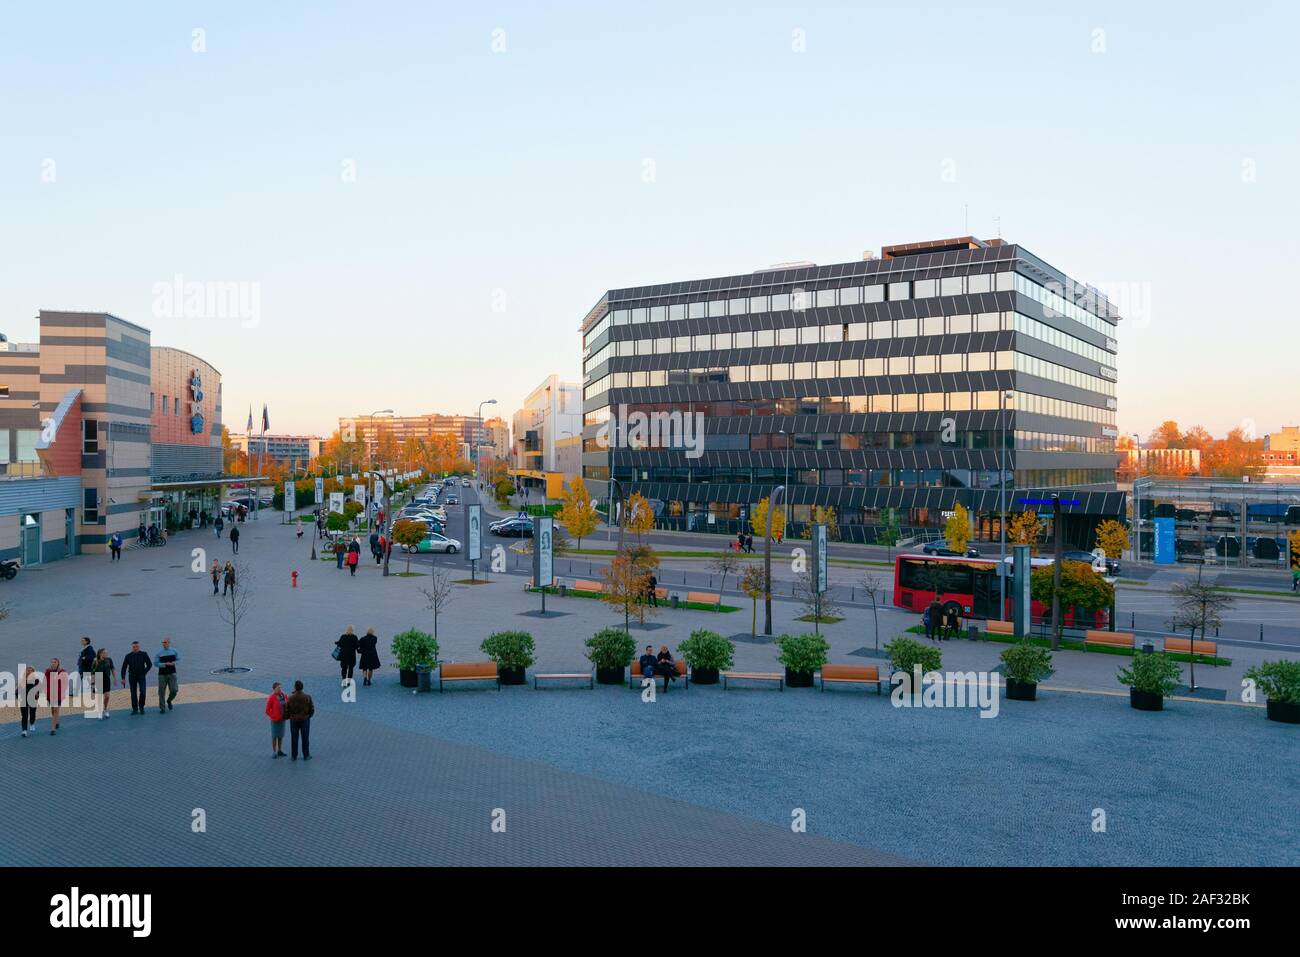 People on square at shopping mall Vilnius Stock Photo